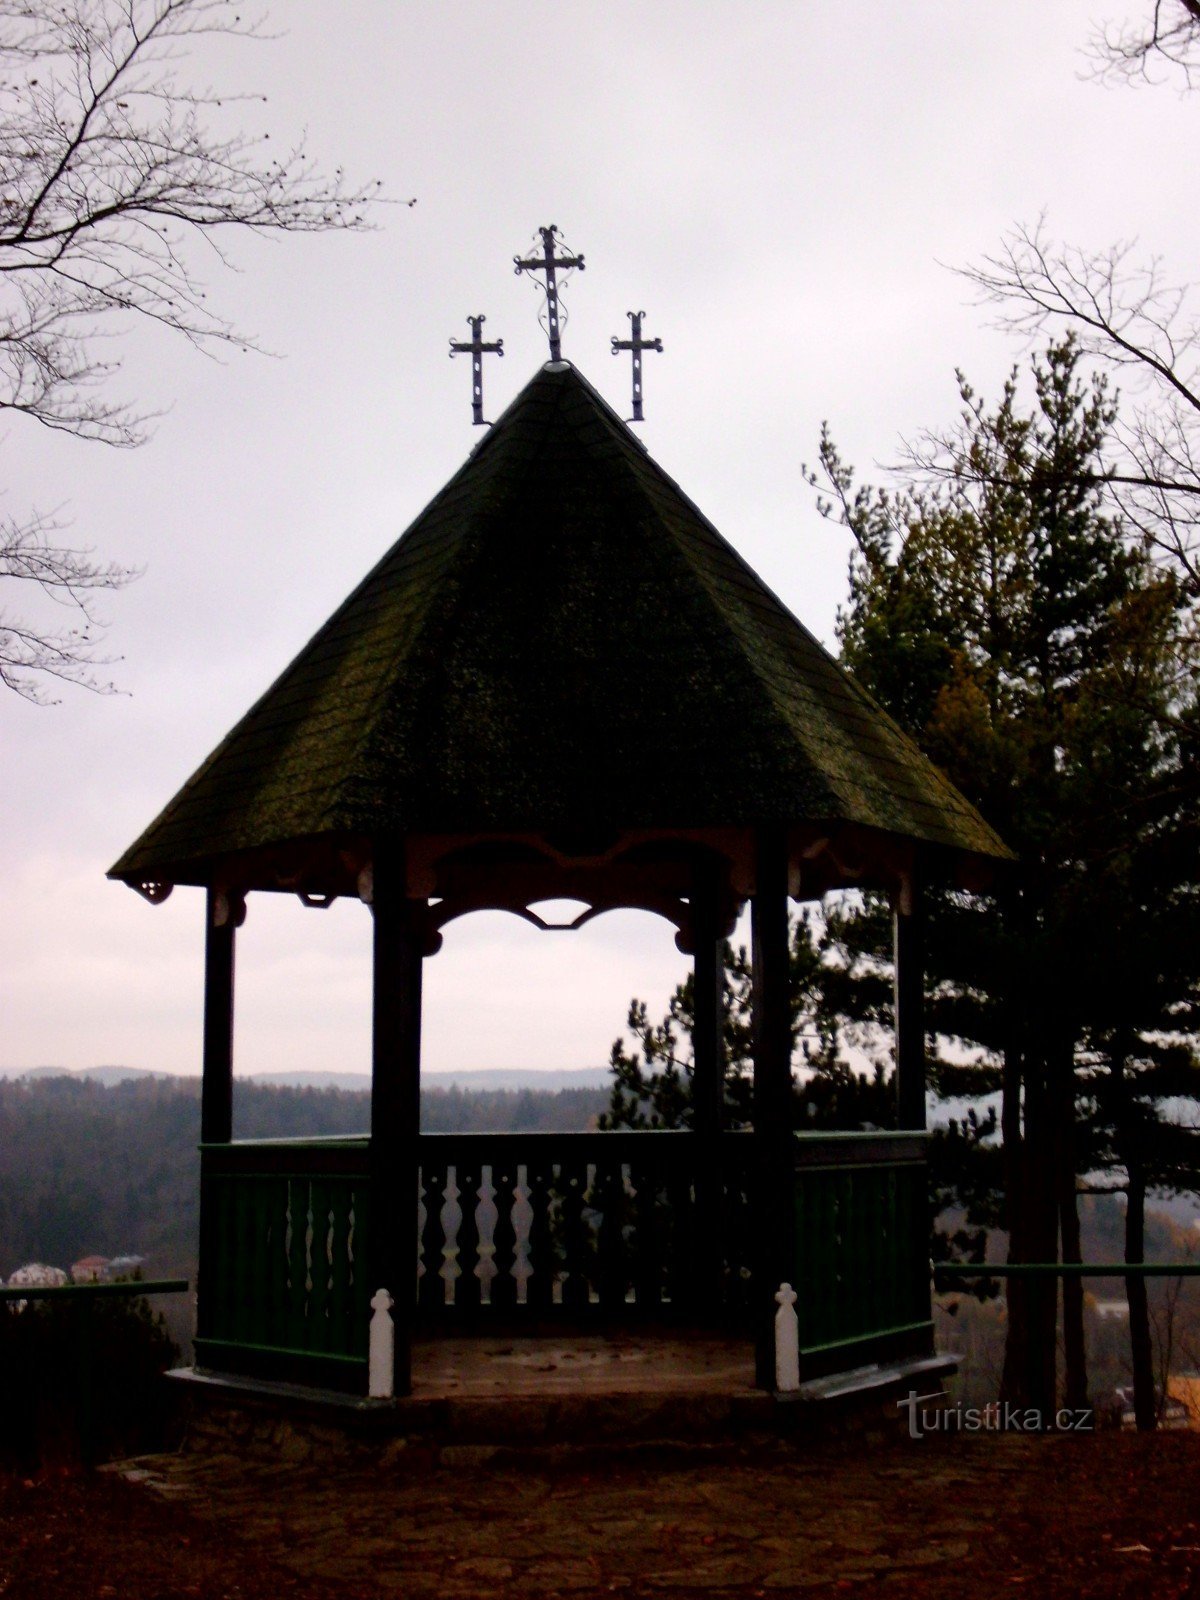 Around Karlovy Vary - through the Three Crosses, the lookout tower and the observatory